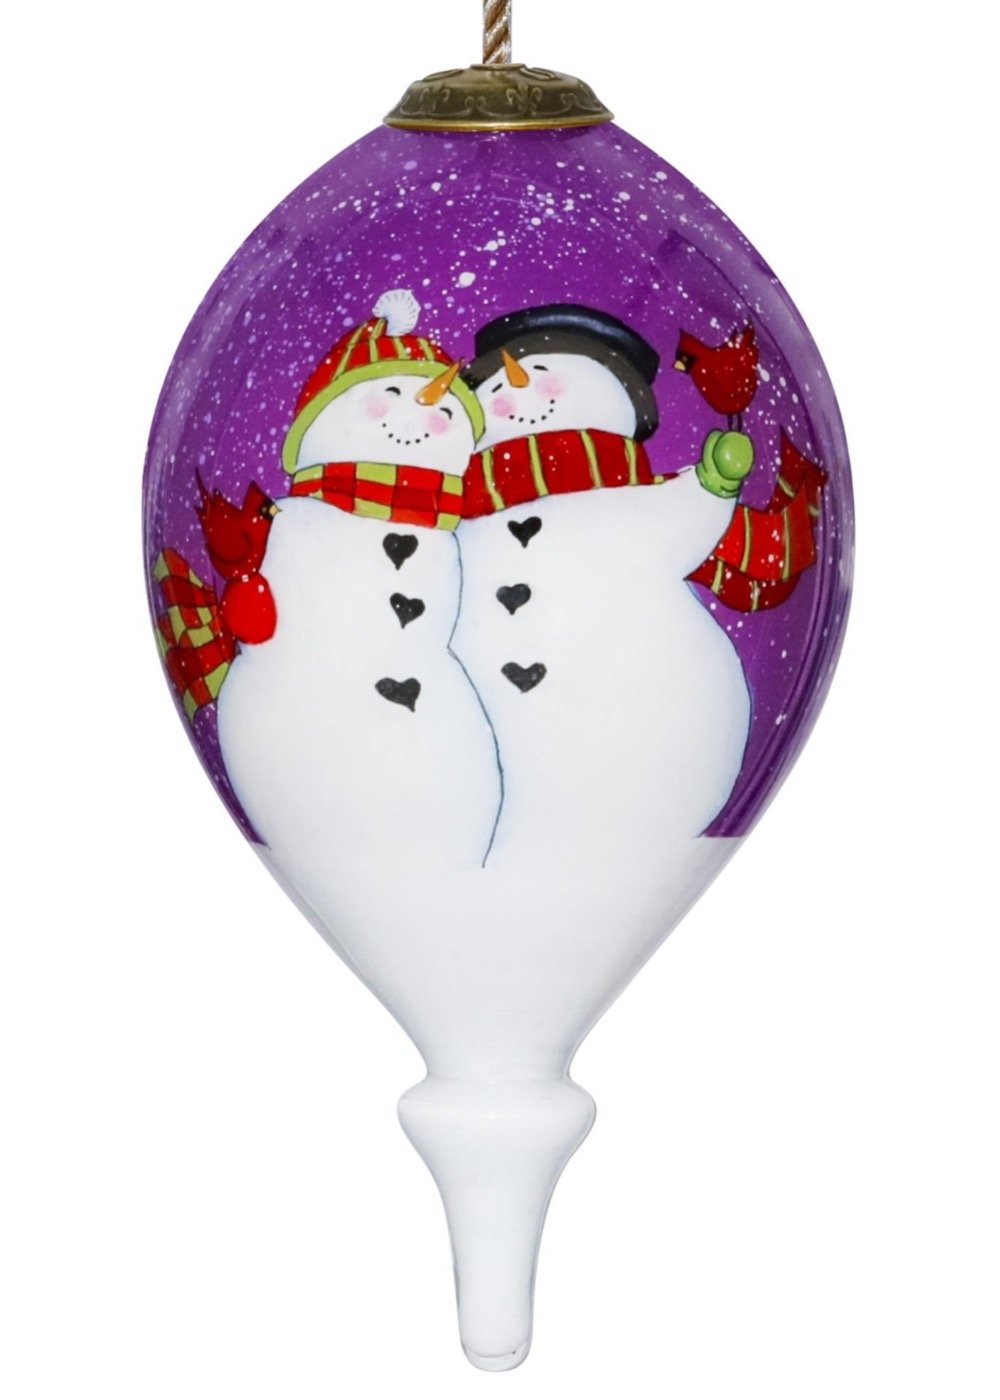 The Susan Winget All I Want for Christmas is You Ornament by Inner Beauty makes a wonderful gift to let any loved one know that you miss them year round. 